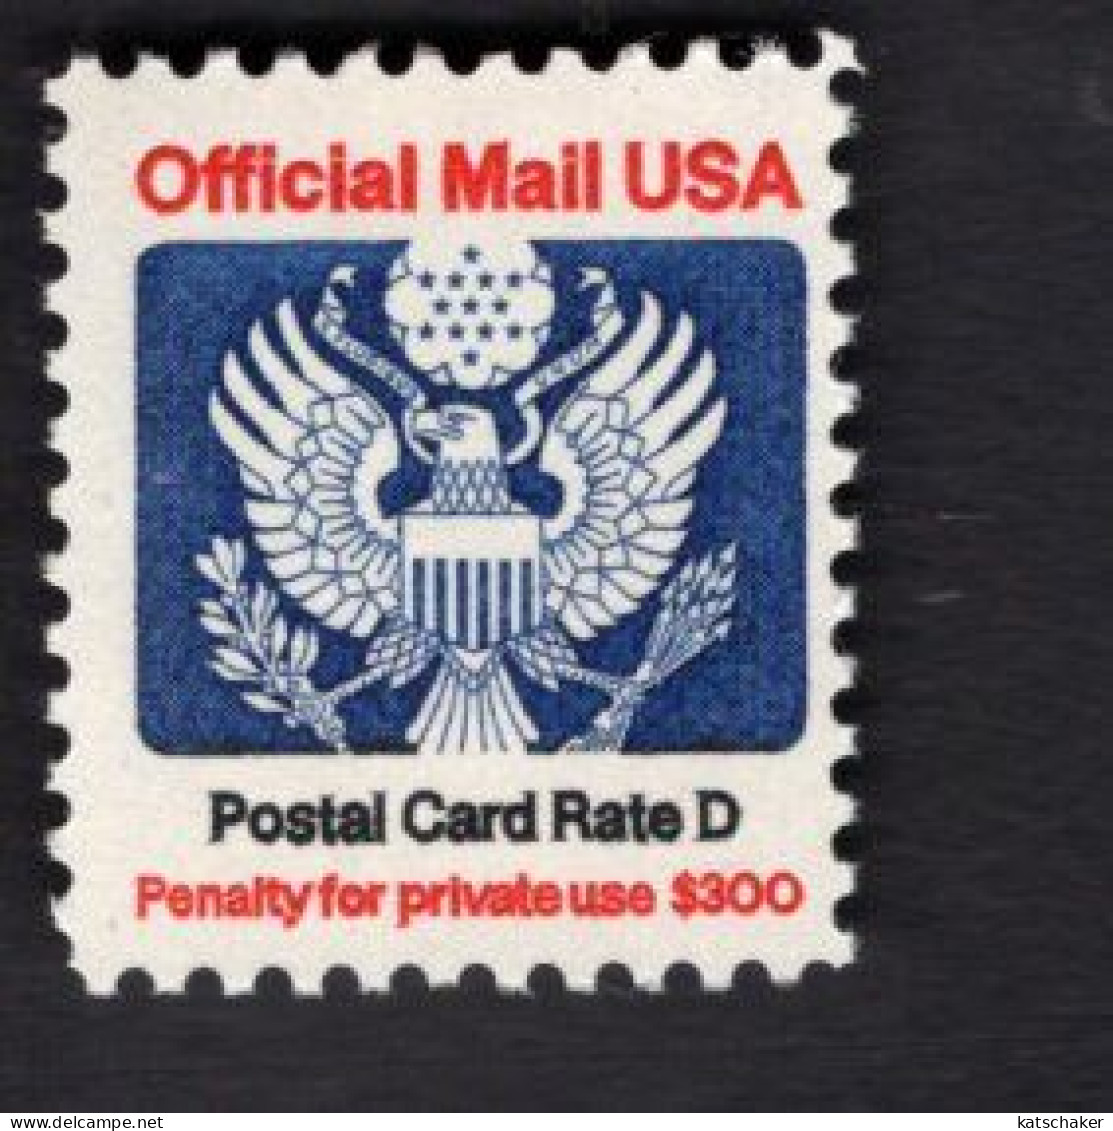 2008963964 1985 (XX) SCOTT O138 POSTFRIS MINT NEVER HINGED Eagle And Shield OFFICIAL MAIL -  POSTAL CARD RATE D - Oficial